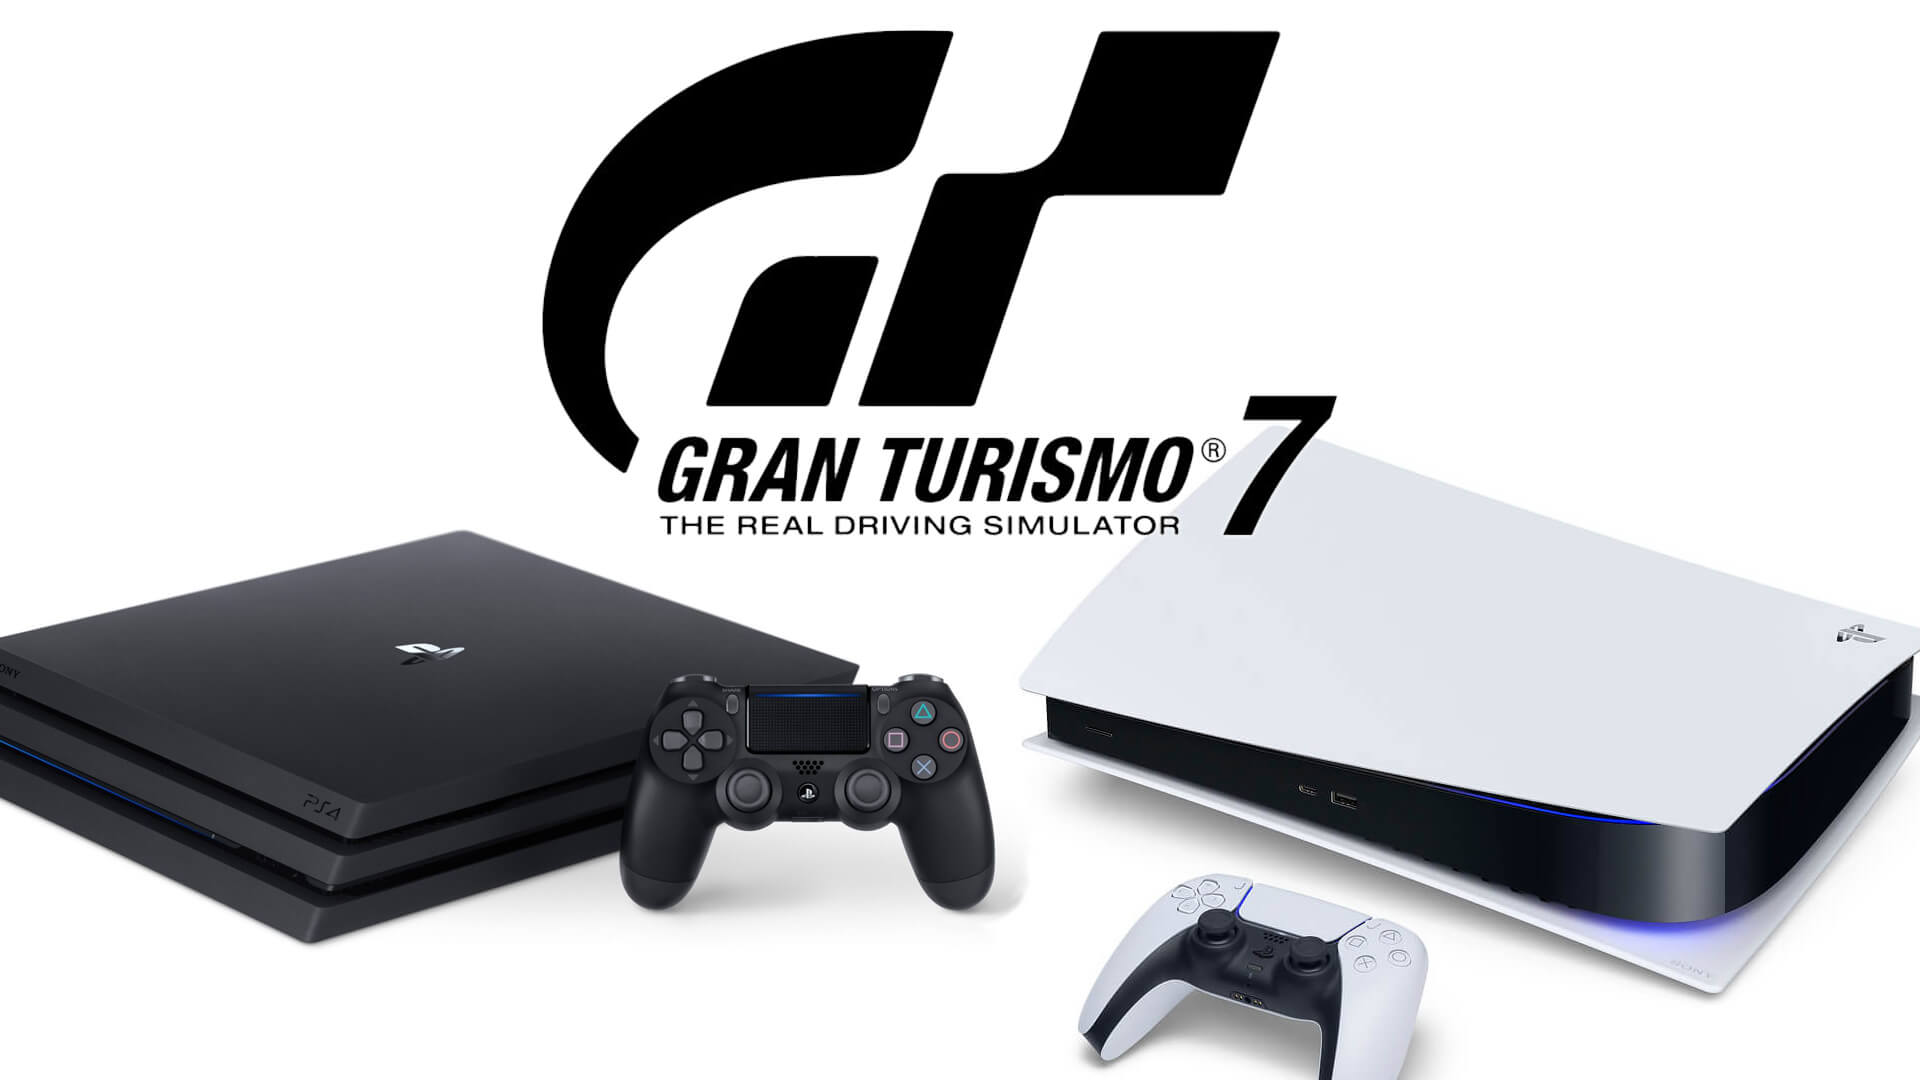 You should get the PS4 Version of GT7!